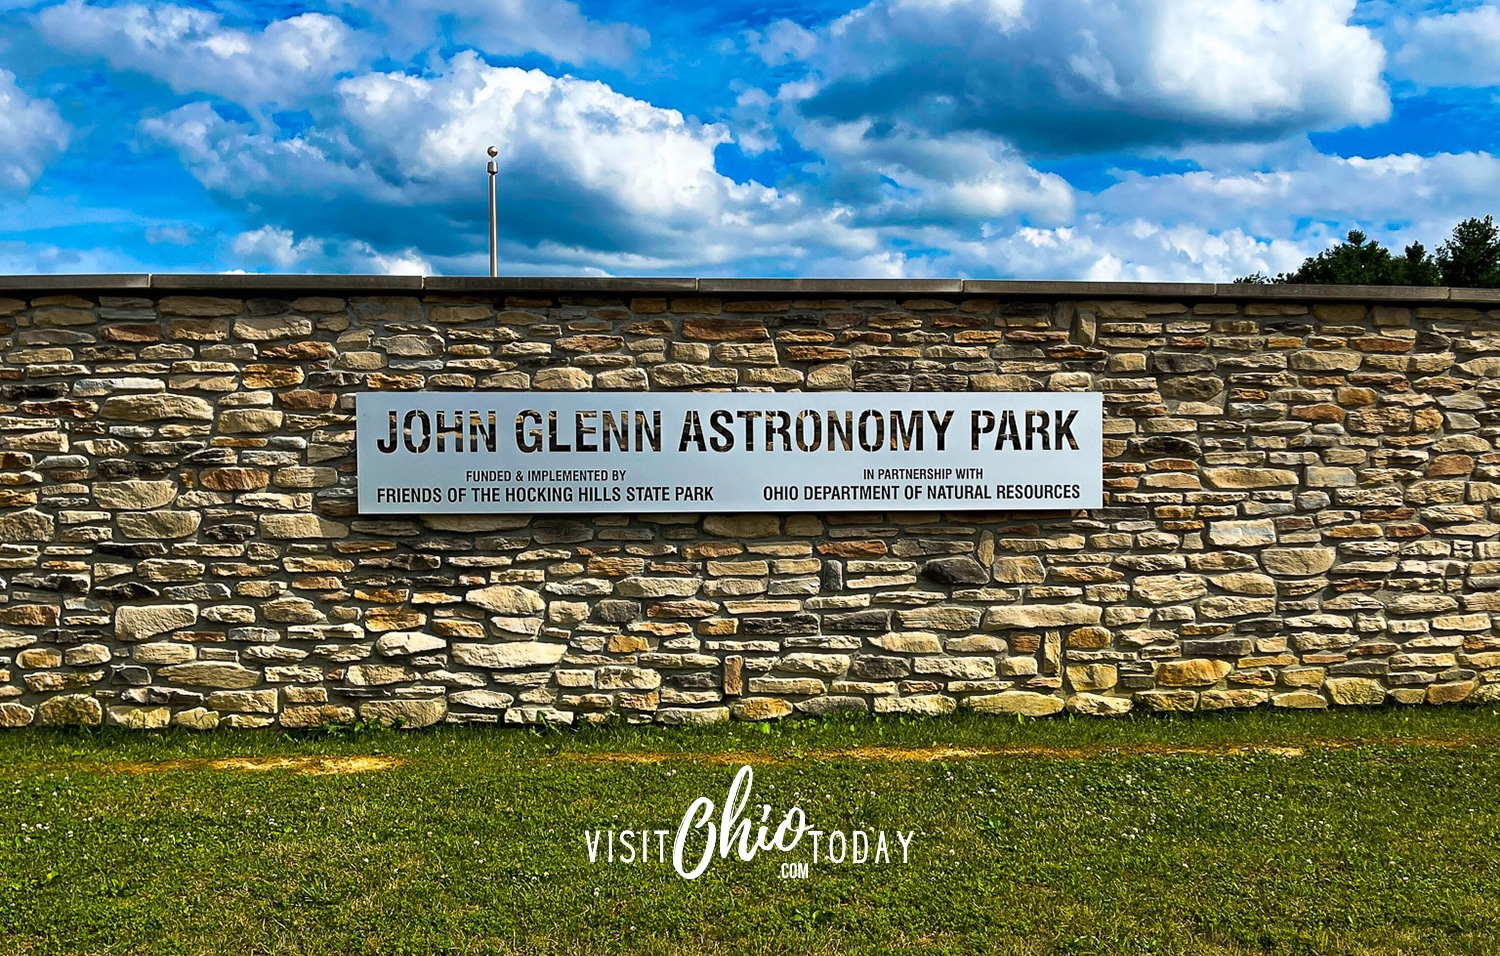 blue sky with white clouds, stone wall that says john glenn astronomy Photo credit: Cindy Gordon of VisitOhioToday.com